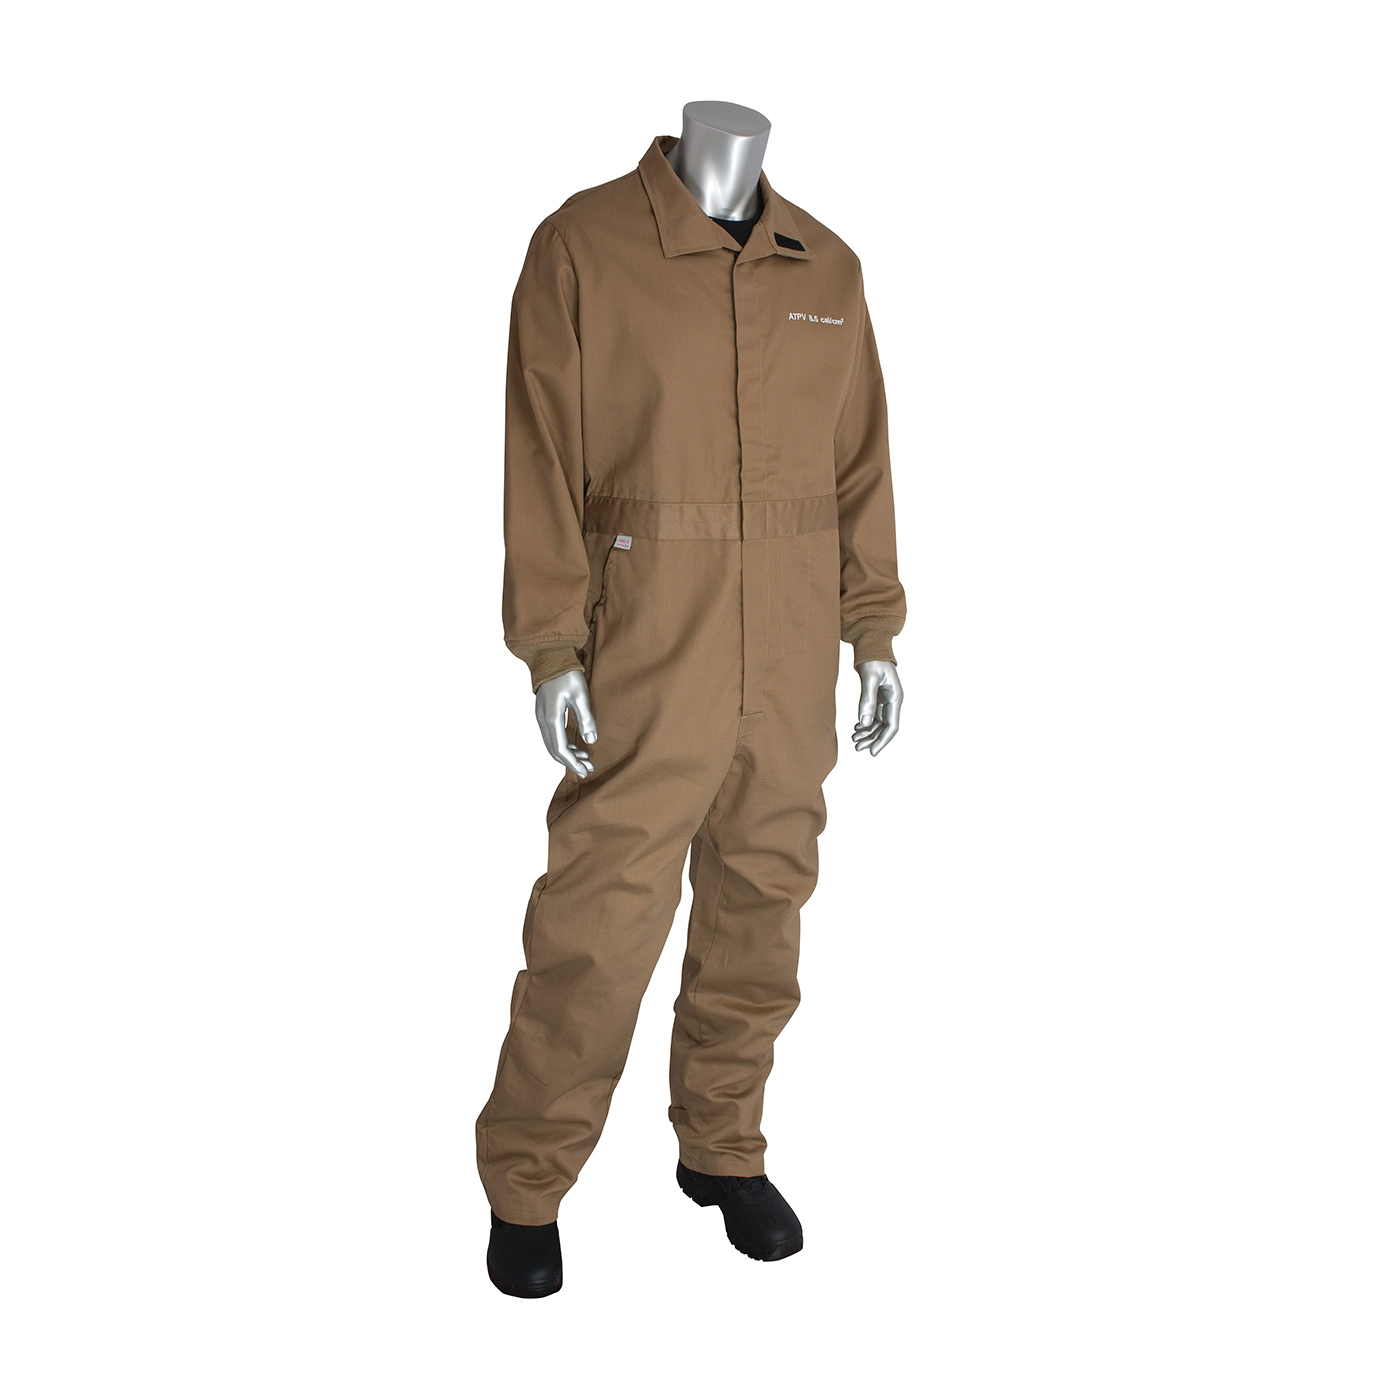 PIP® 9100-2100D/4X Flame Resistant Coverall With Vented Back, 4XL, Khaki, 90% Cotton/10% Nylon/FR Twill Weave, 60 to 62 in Chest, 32 in L Inseam